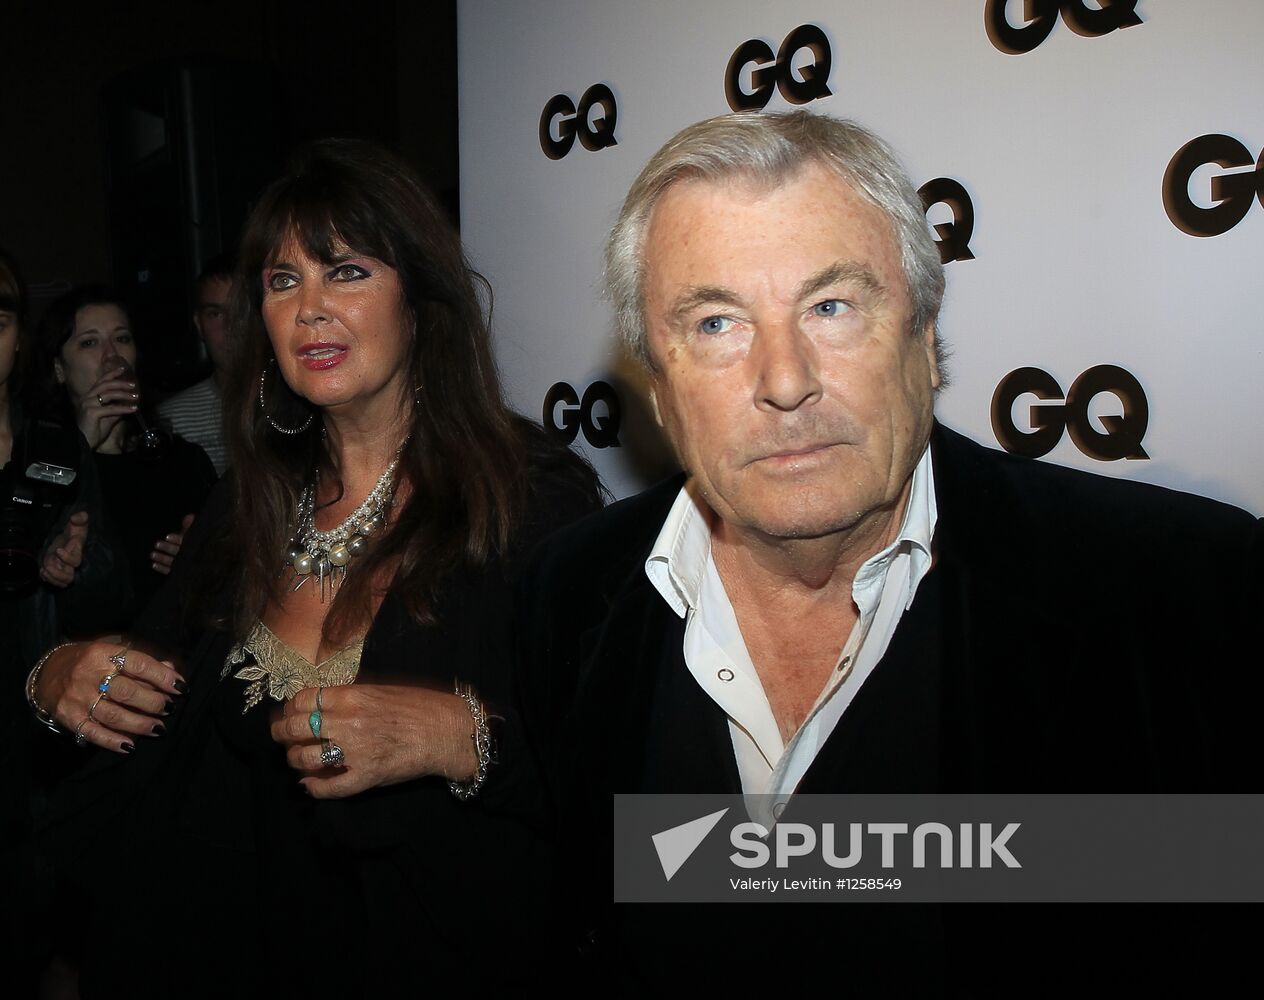 Bond by GQ multimedia exhibition opens in Moscow